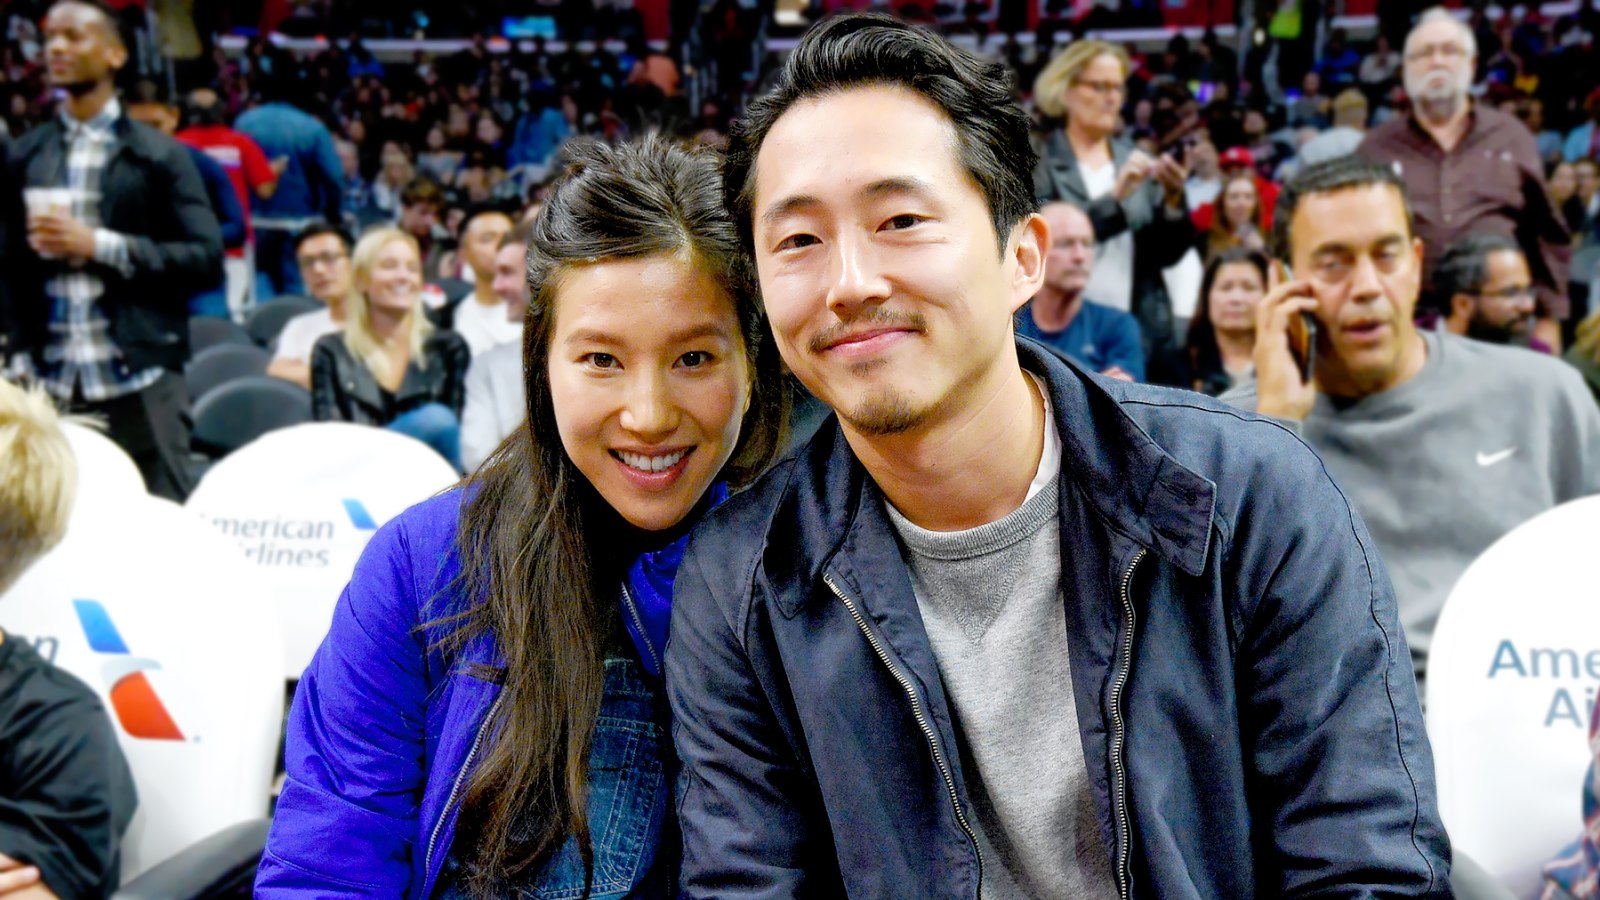 Steven Yeun (R) and Joana Pak attend a basketball game between the Detroit Pistons and the Los Angeles Clippers at Staples Center on November 7, 2016 in Los Angeles, California.